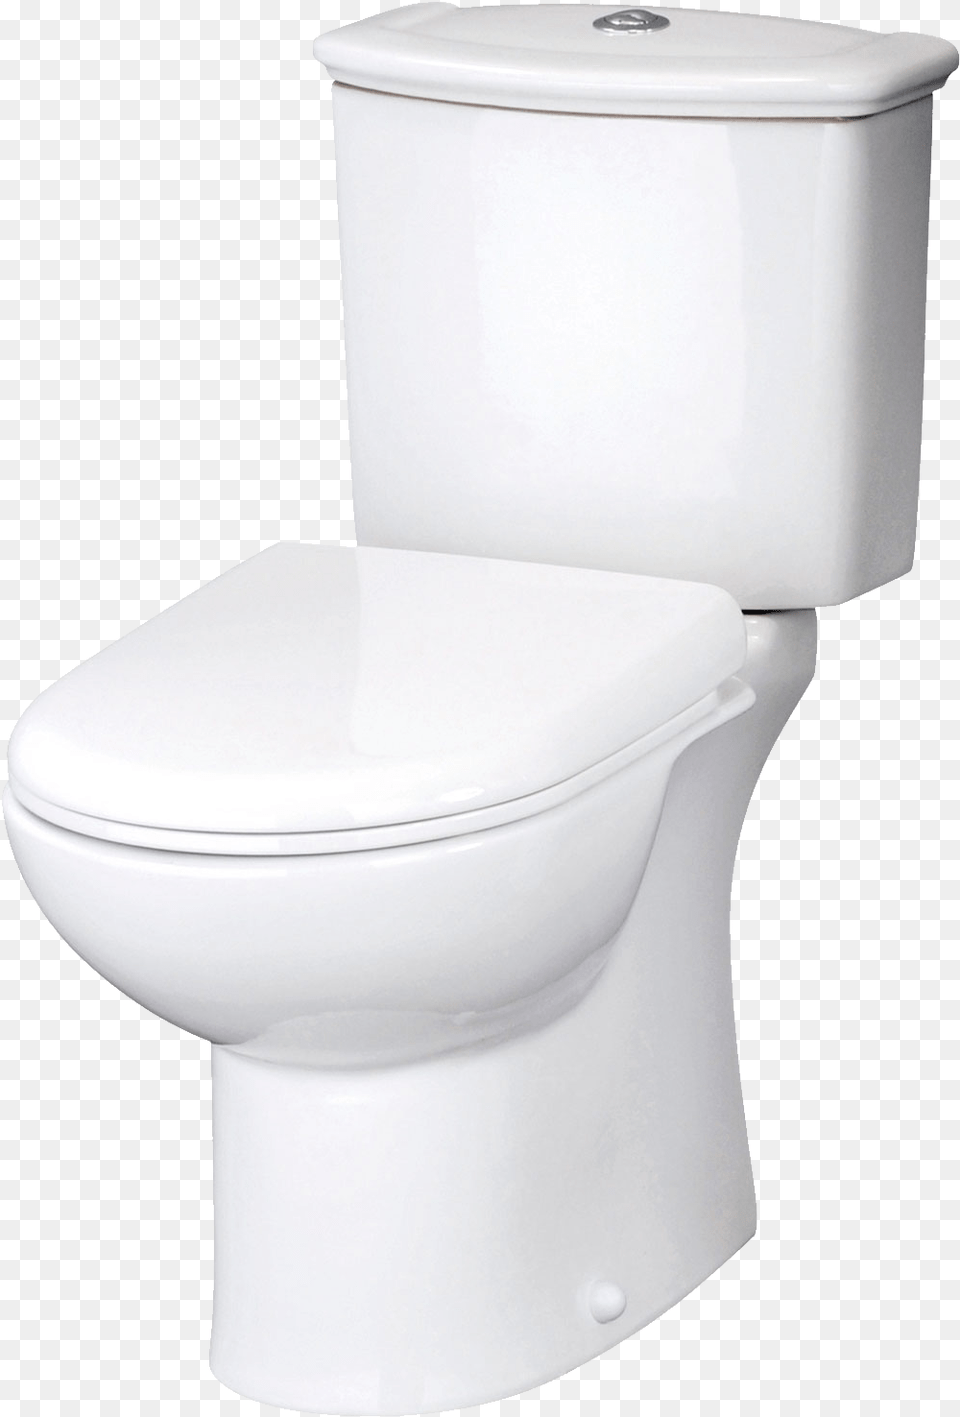 Toilet Black Background Image With Toilet With Black Background, Indoors, Bathroom, Room Png